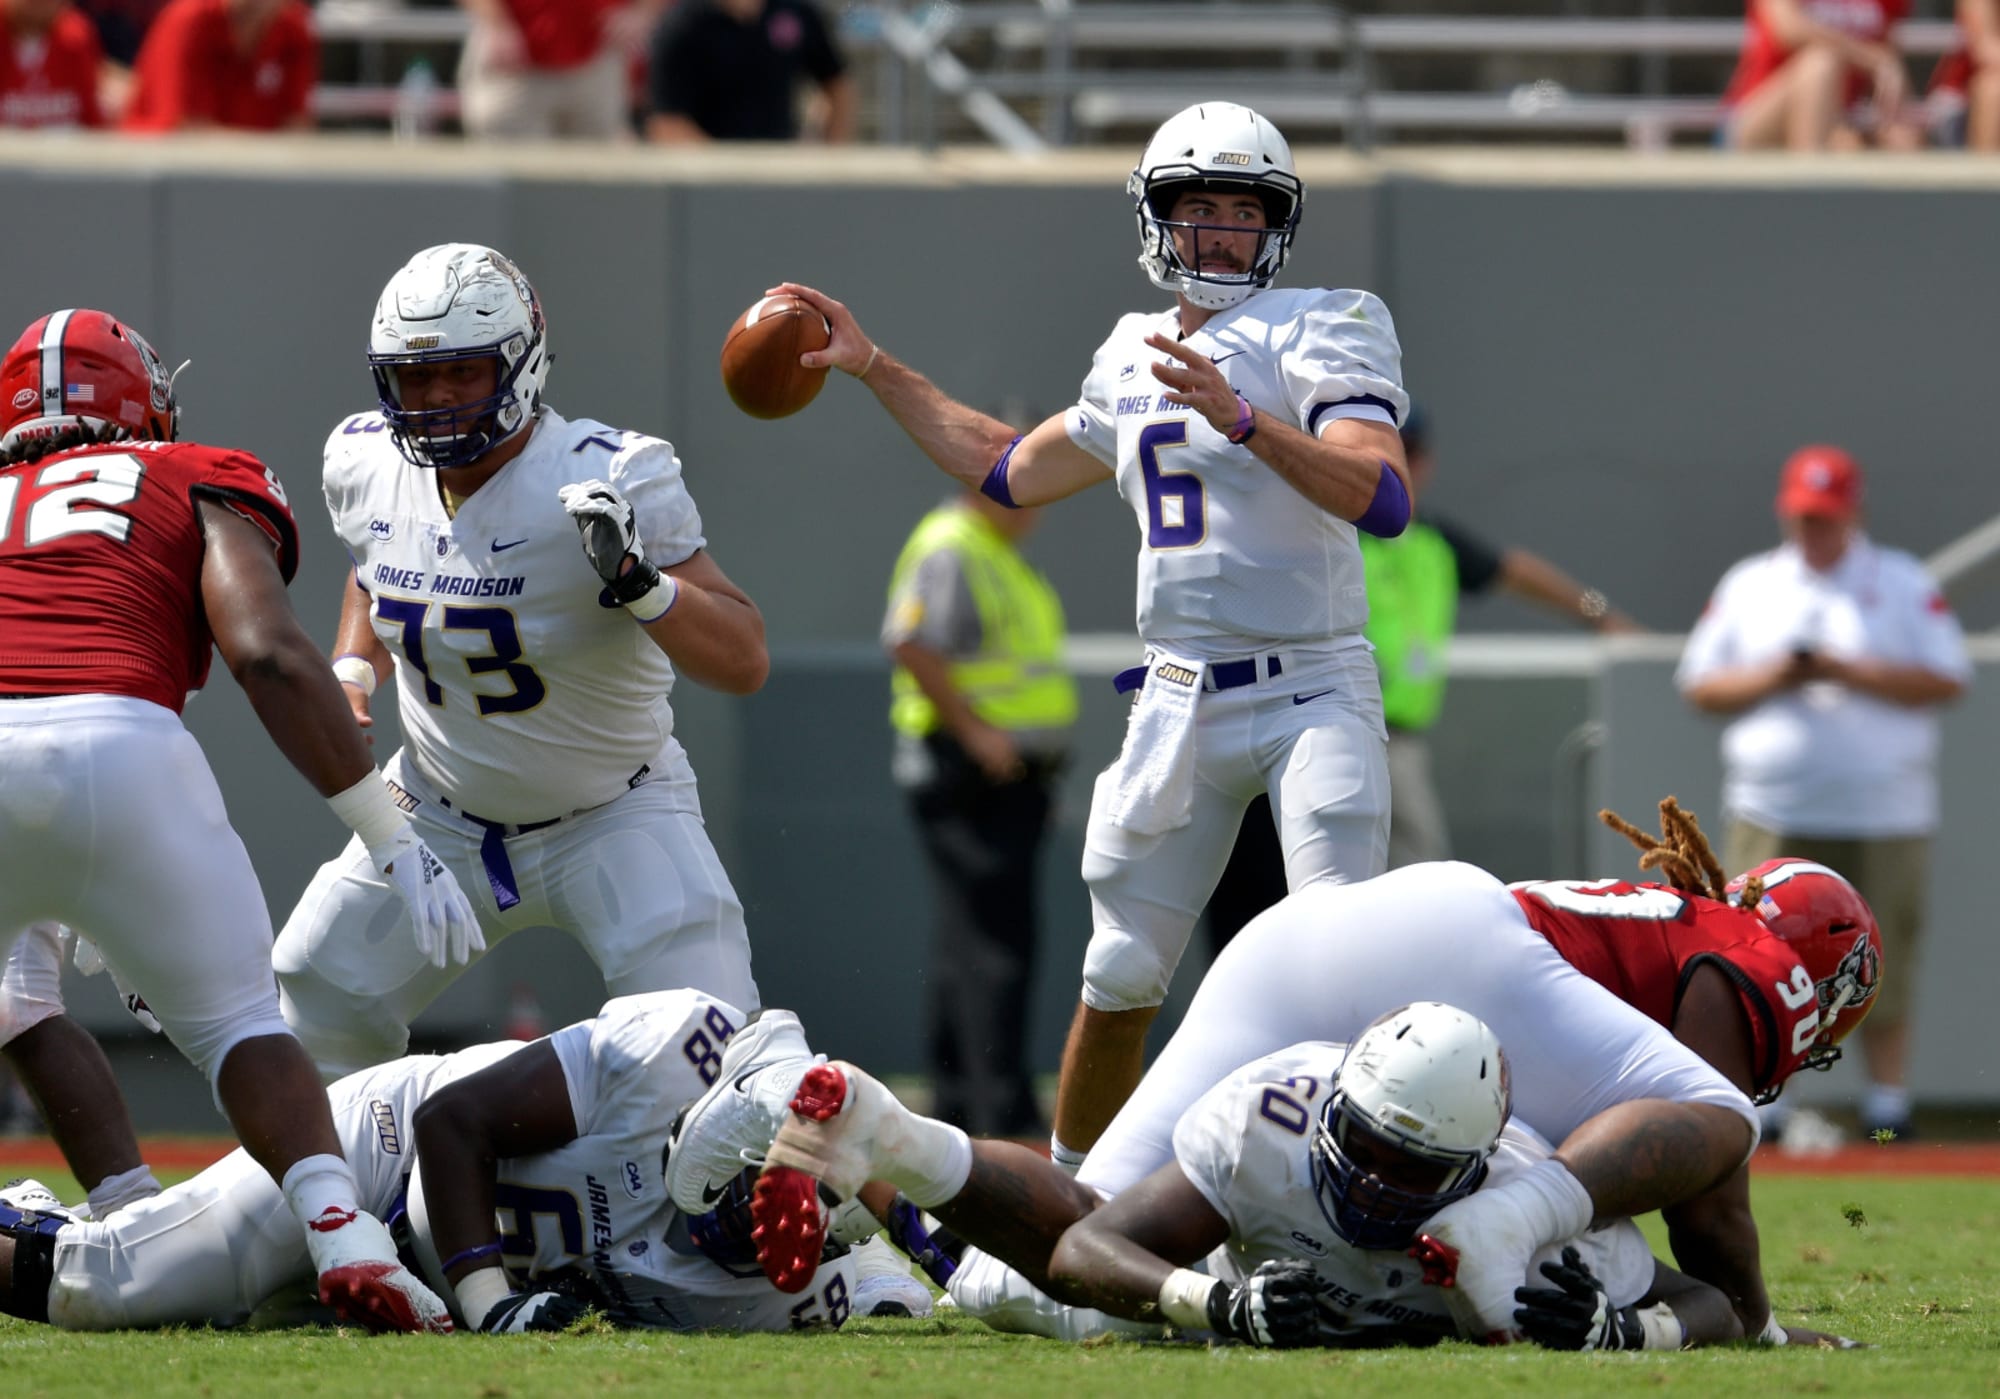 James Madison football advances to FCS title with win vs. Weber State